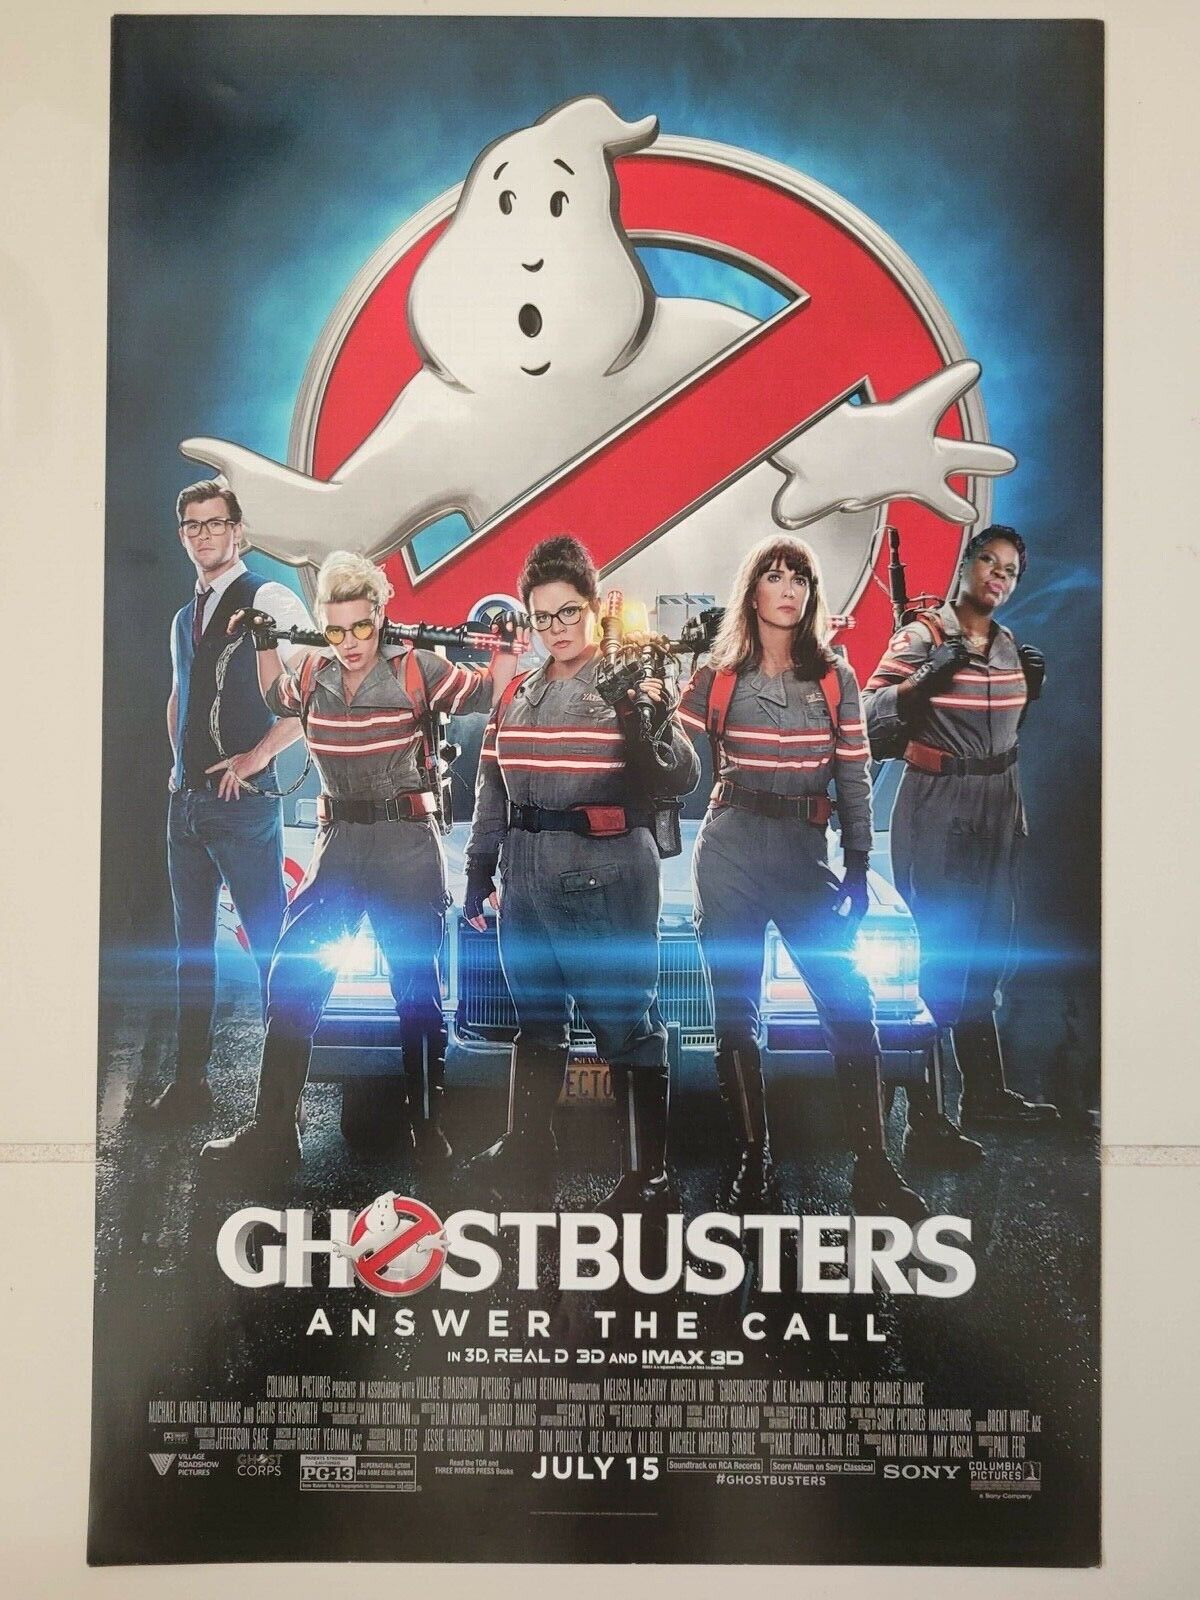 GHOSTBUSTERS 2016 MOVIE PROMO POSTER 11 x 17 NEW UNFOLDED & UNUSED ROLLED